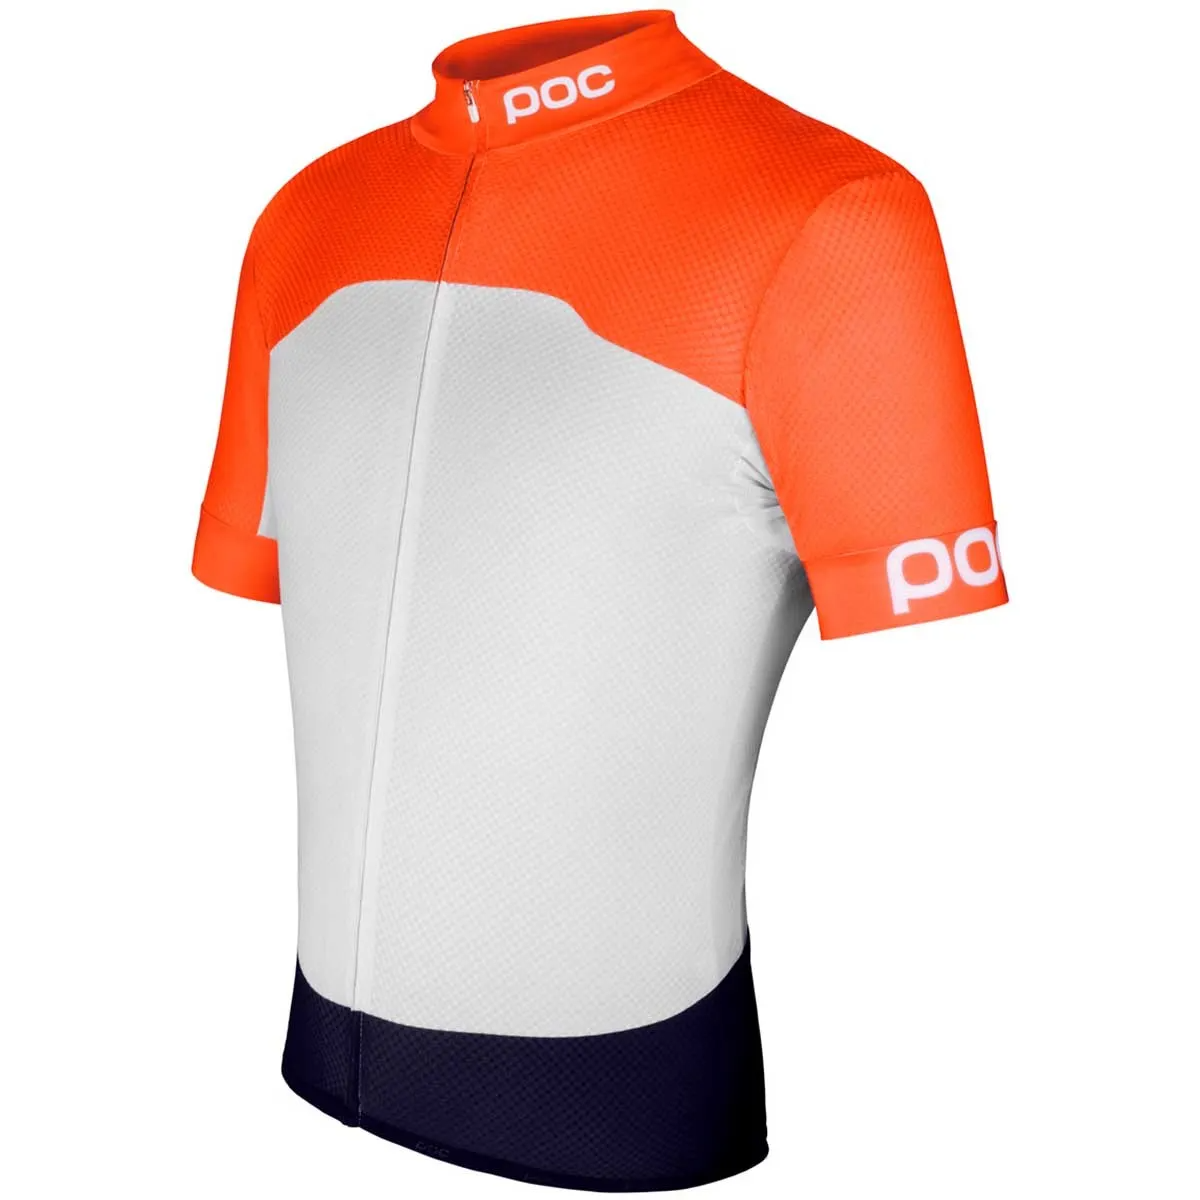 Poc red and white bike jersey